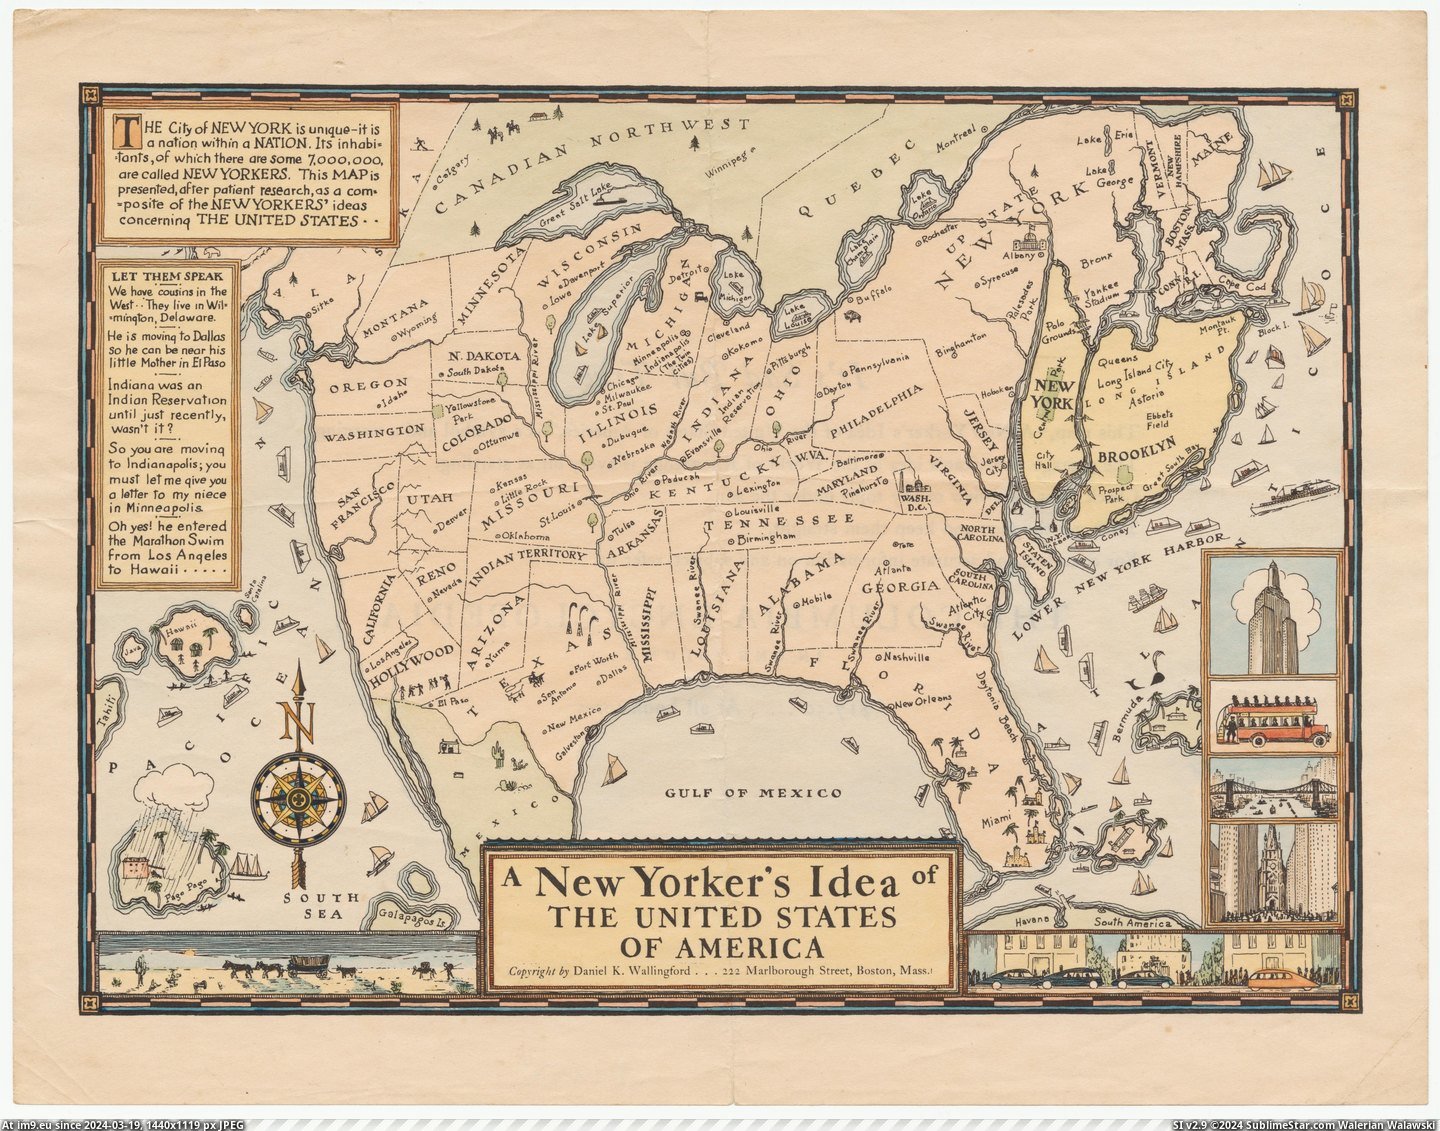 #States #America #Idea #United [Mapporn] A New Yorker's Idea of the United States of America (1936) [6677x5202] Pic. (Изображение из альбом My r/MAPS favs))